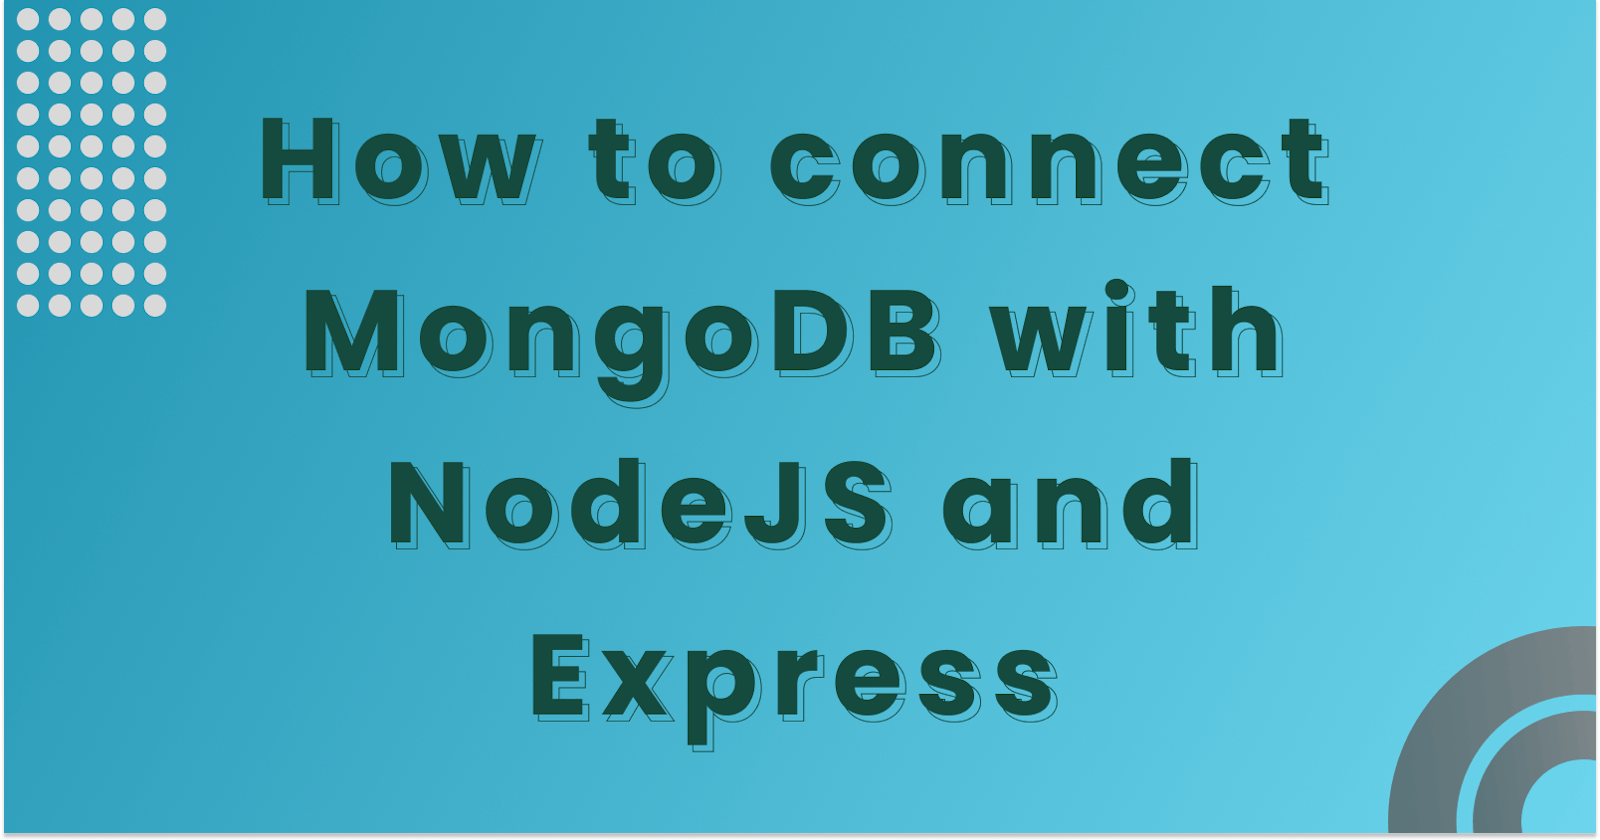 How to connect MongoDB with Node.JS and Express.